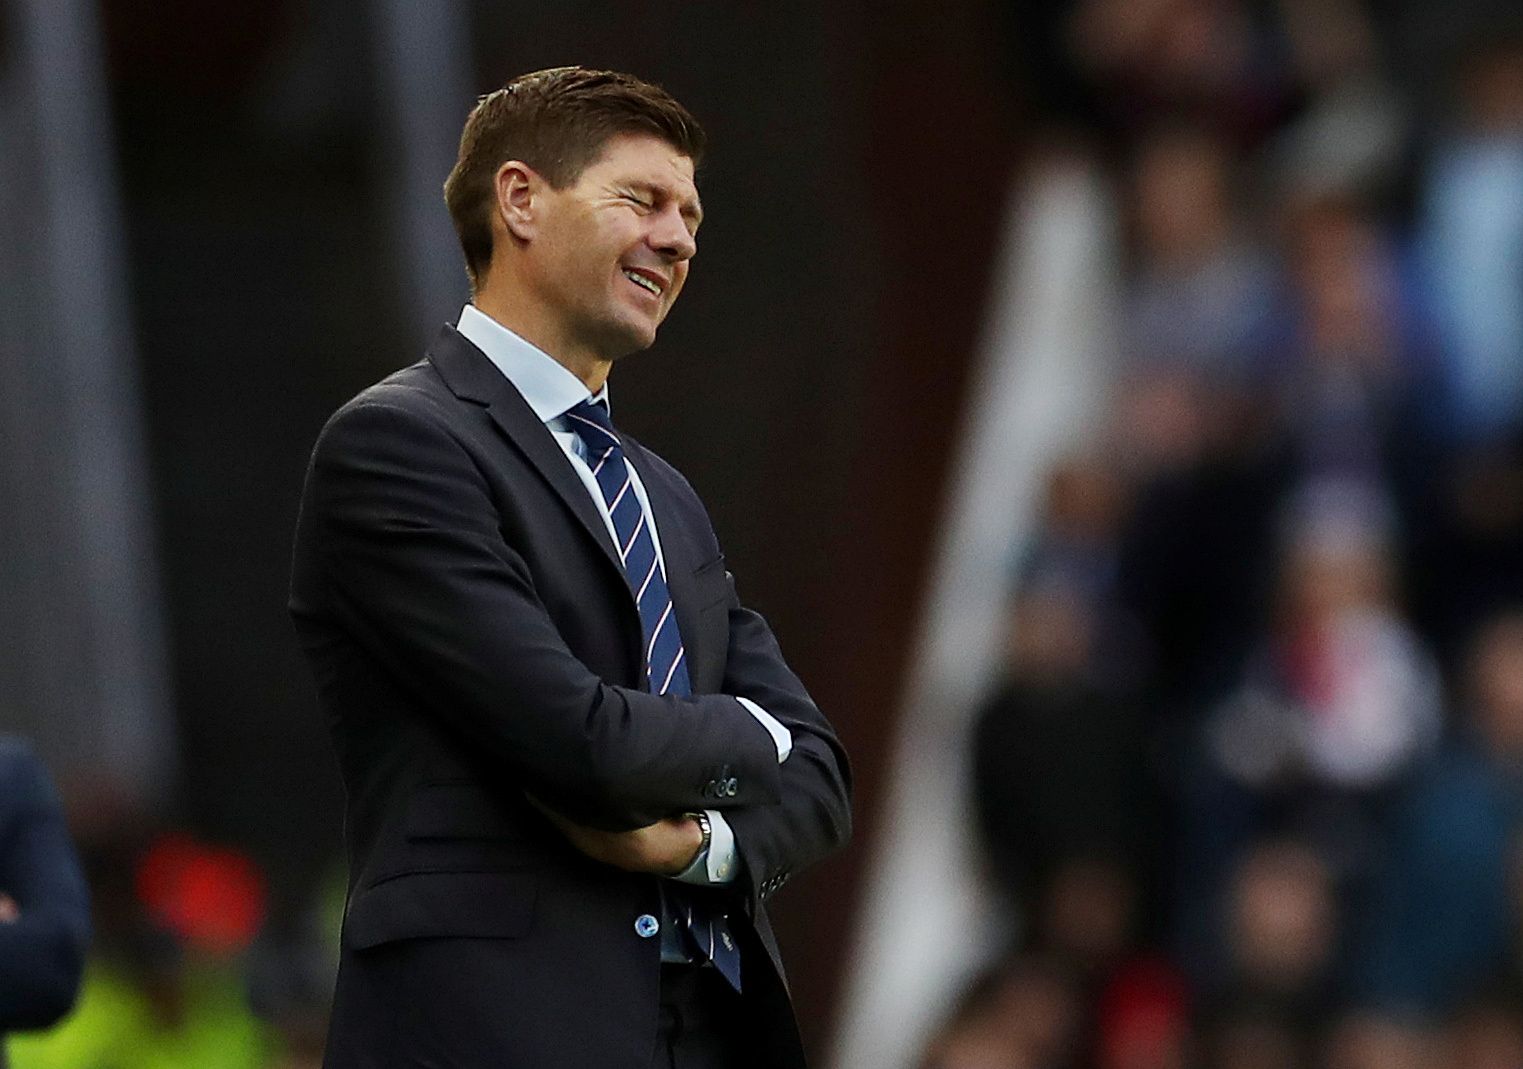 Soccer Football - First Qualifying Round Second Leg - Rangers v St Joseph's - Ibrox, Glasgow, Britain - July 18, 2019   Rangers manager Steven Gerrard        Action Images via Reuters/Lee Smith